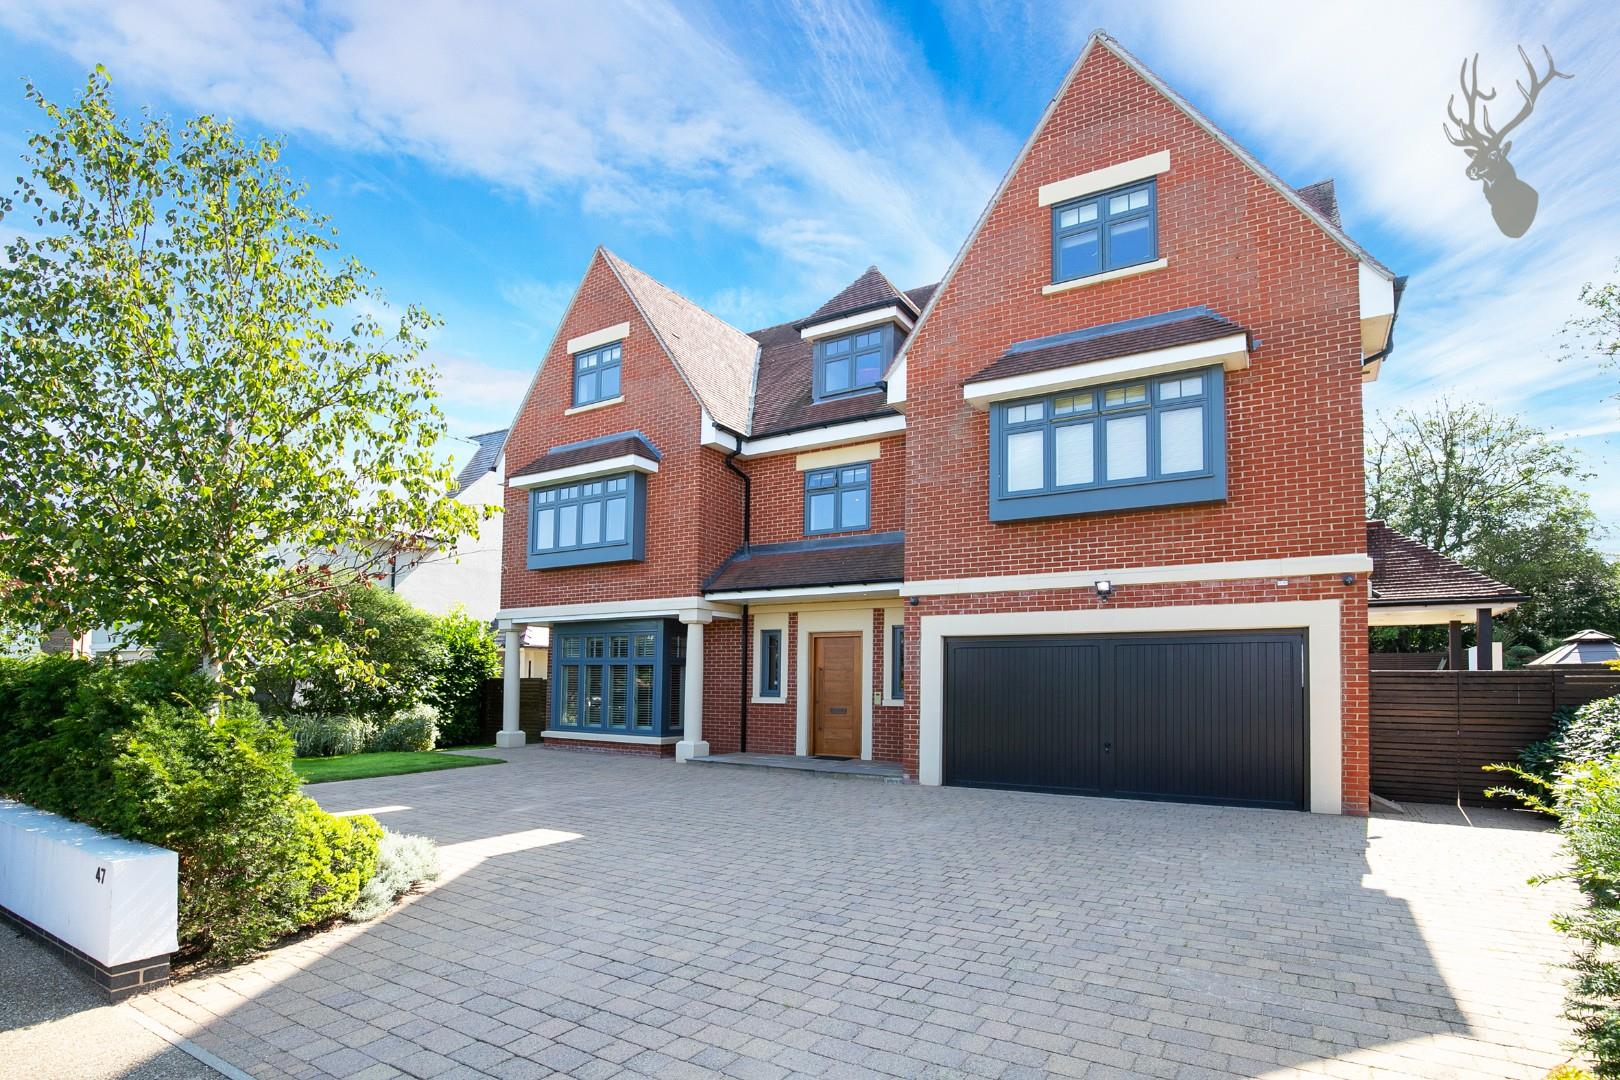 Similar Property: House - Detached in Chigwell